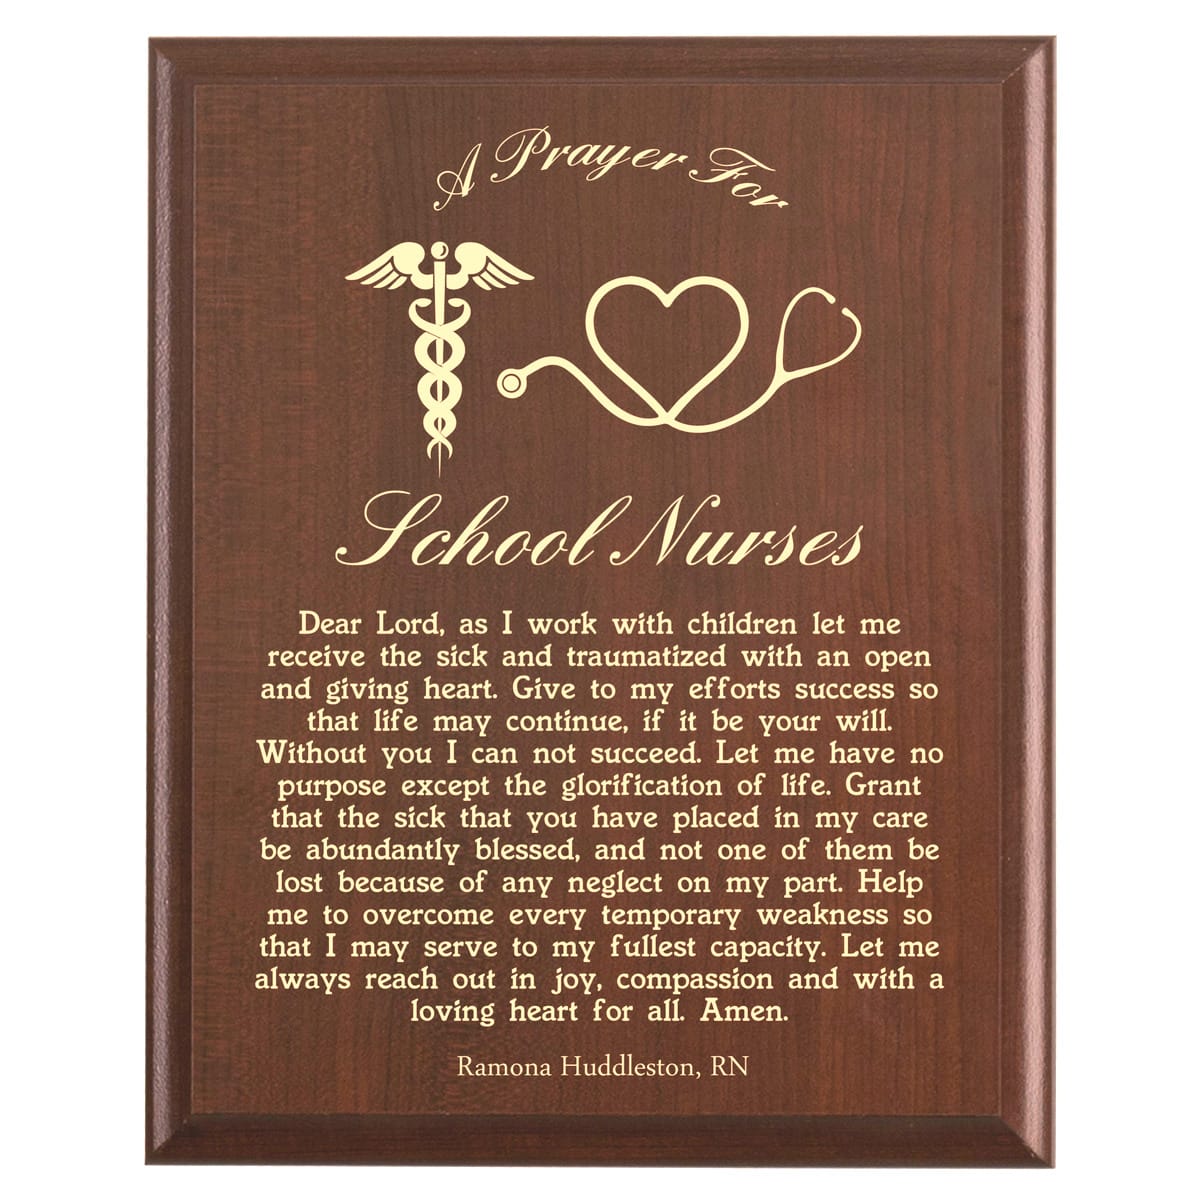 Plaque photo: School Nurse Prayer Plaque design with free personalization. Wood style finish with customized text.